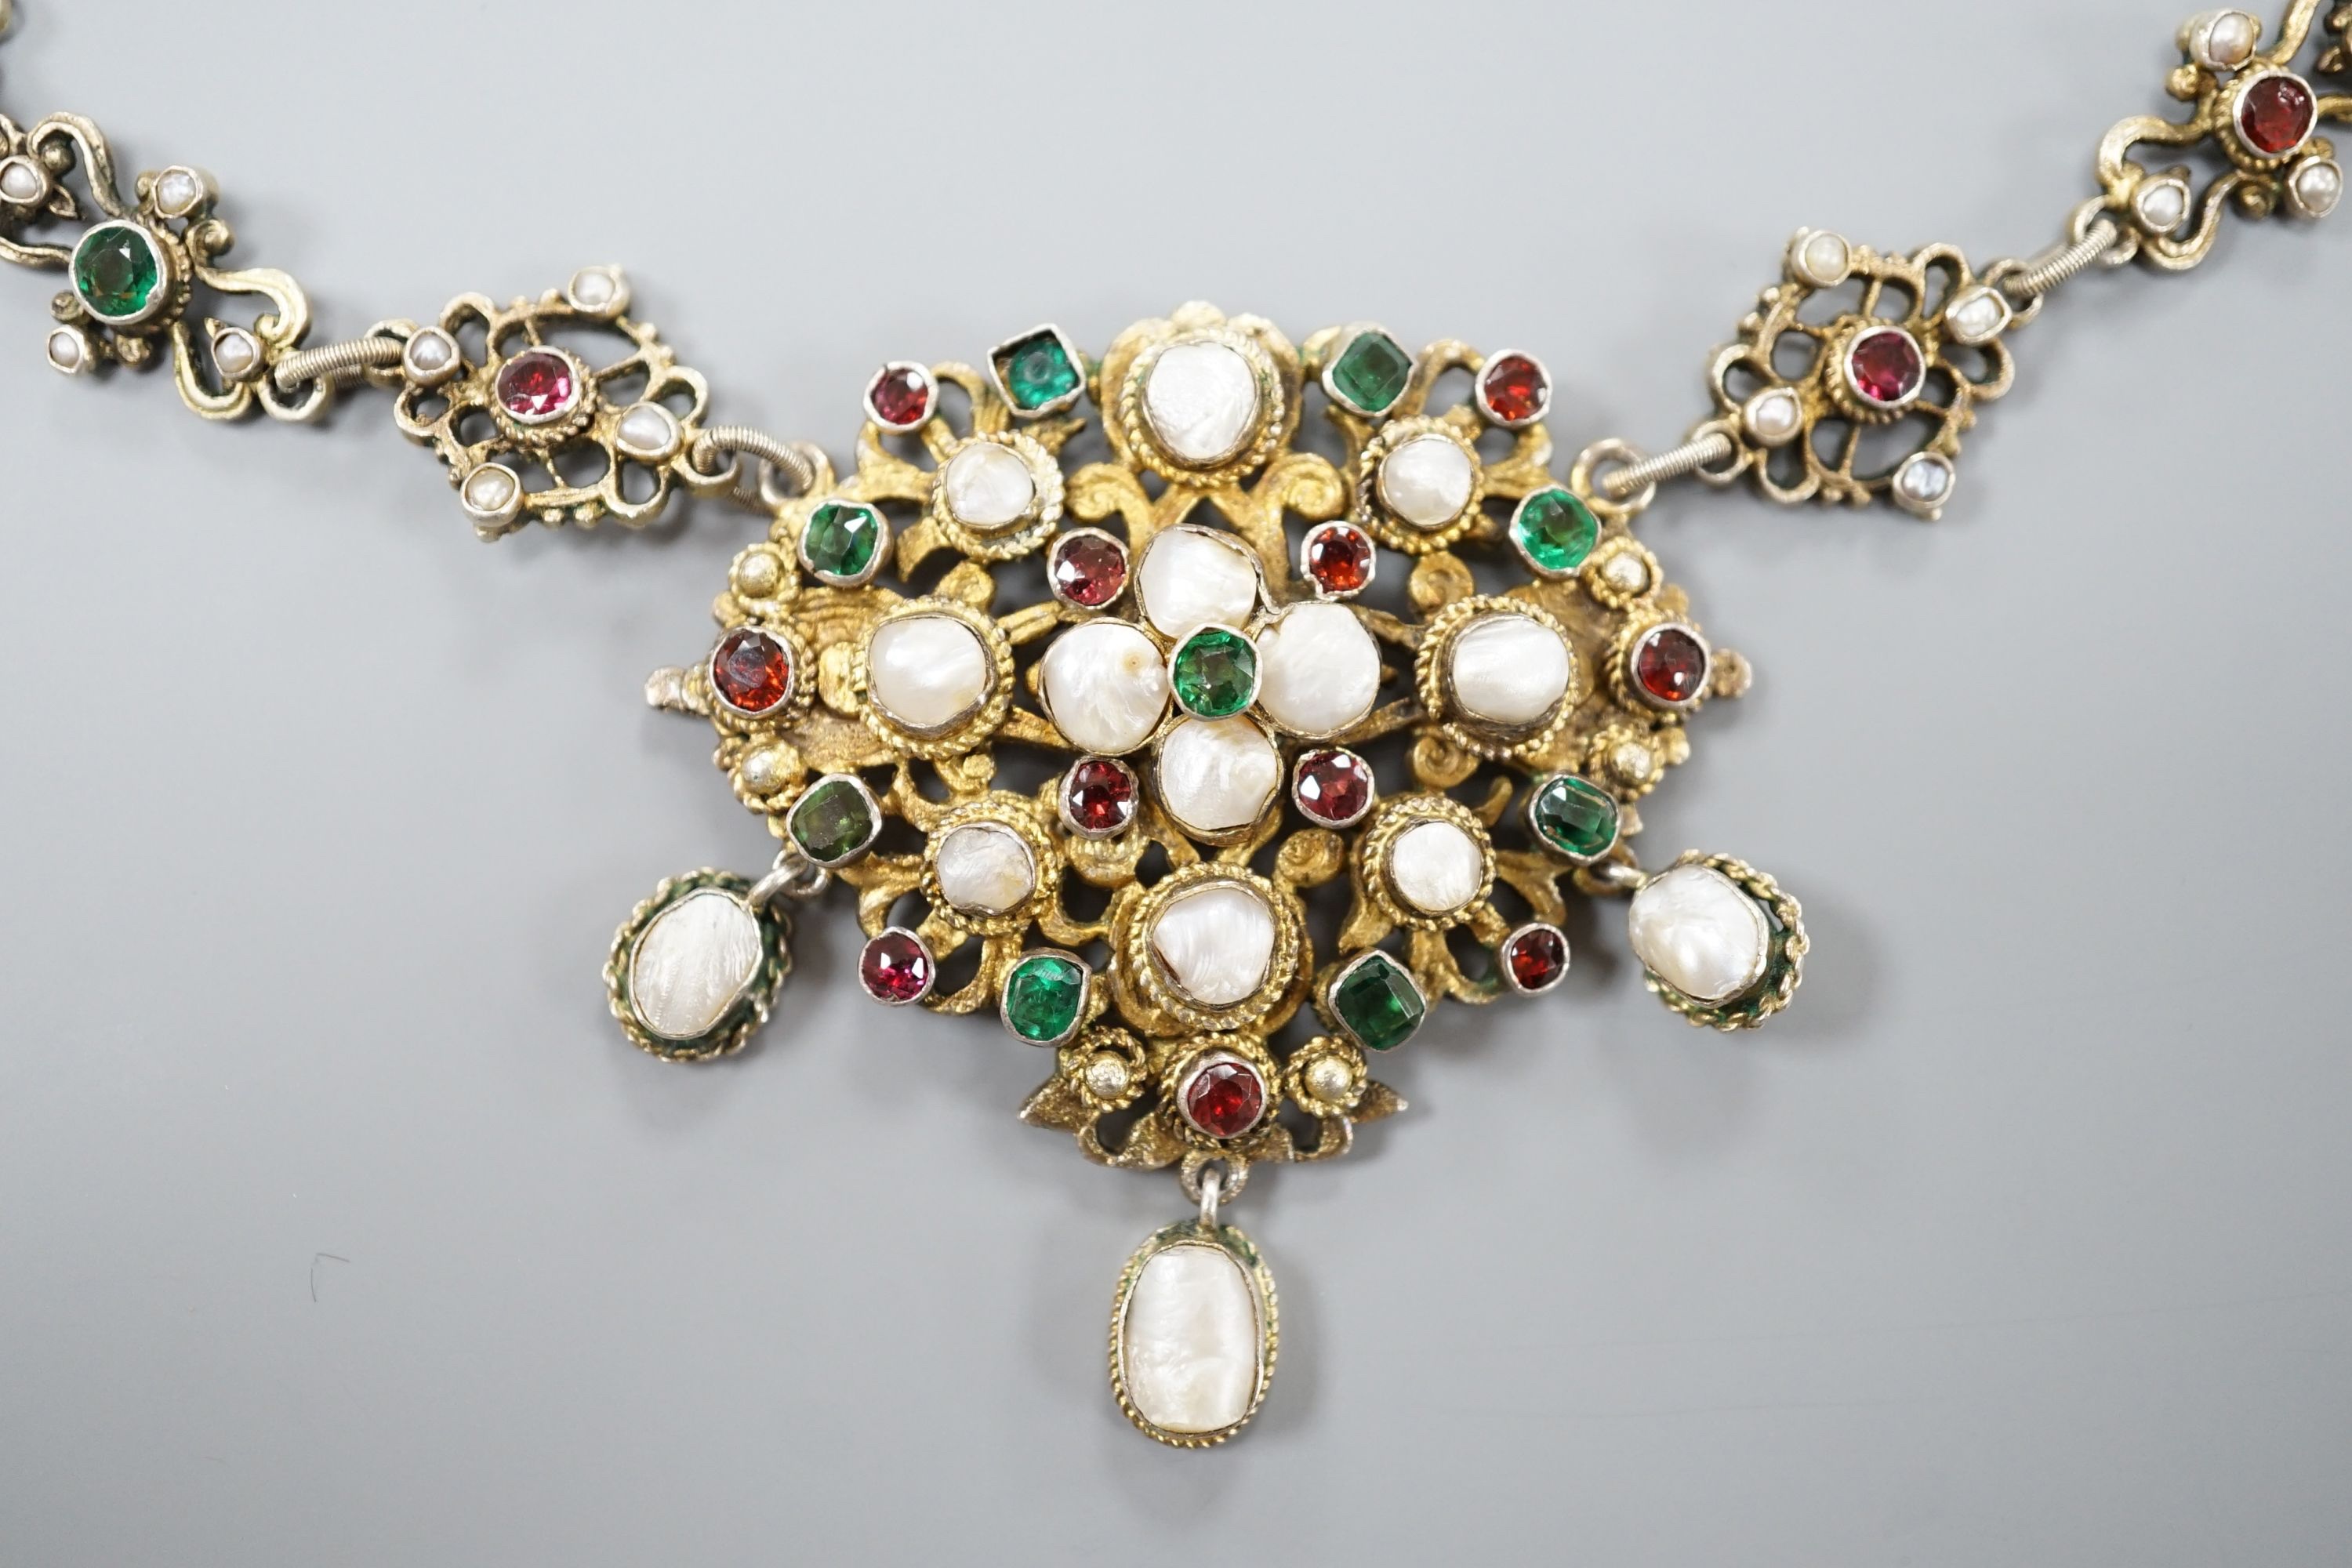 An ornate 19th century Austro-Hungarian gilt white metal, baroque pearl, paste and gem set drop necklace, 46cm, maker's mark WH or WM.